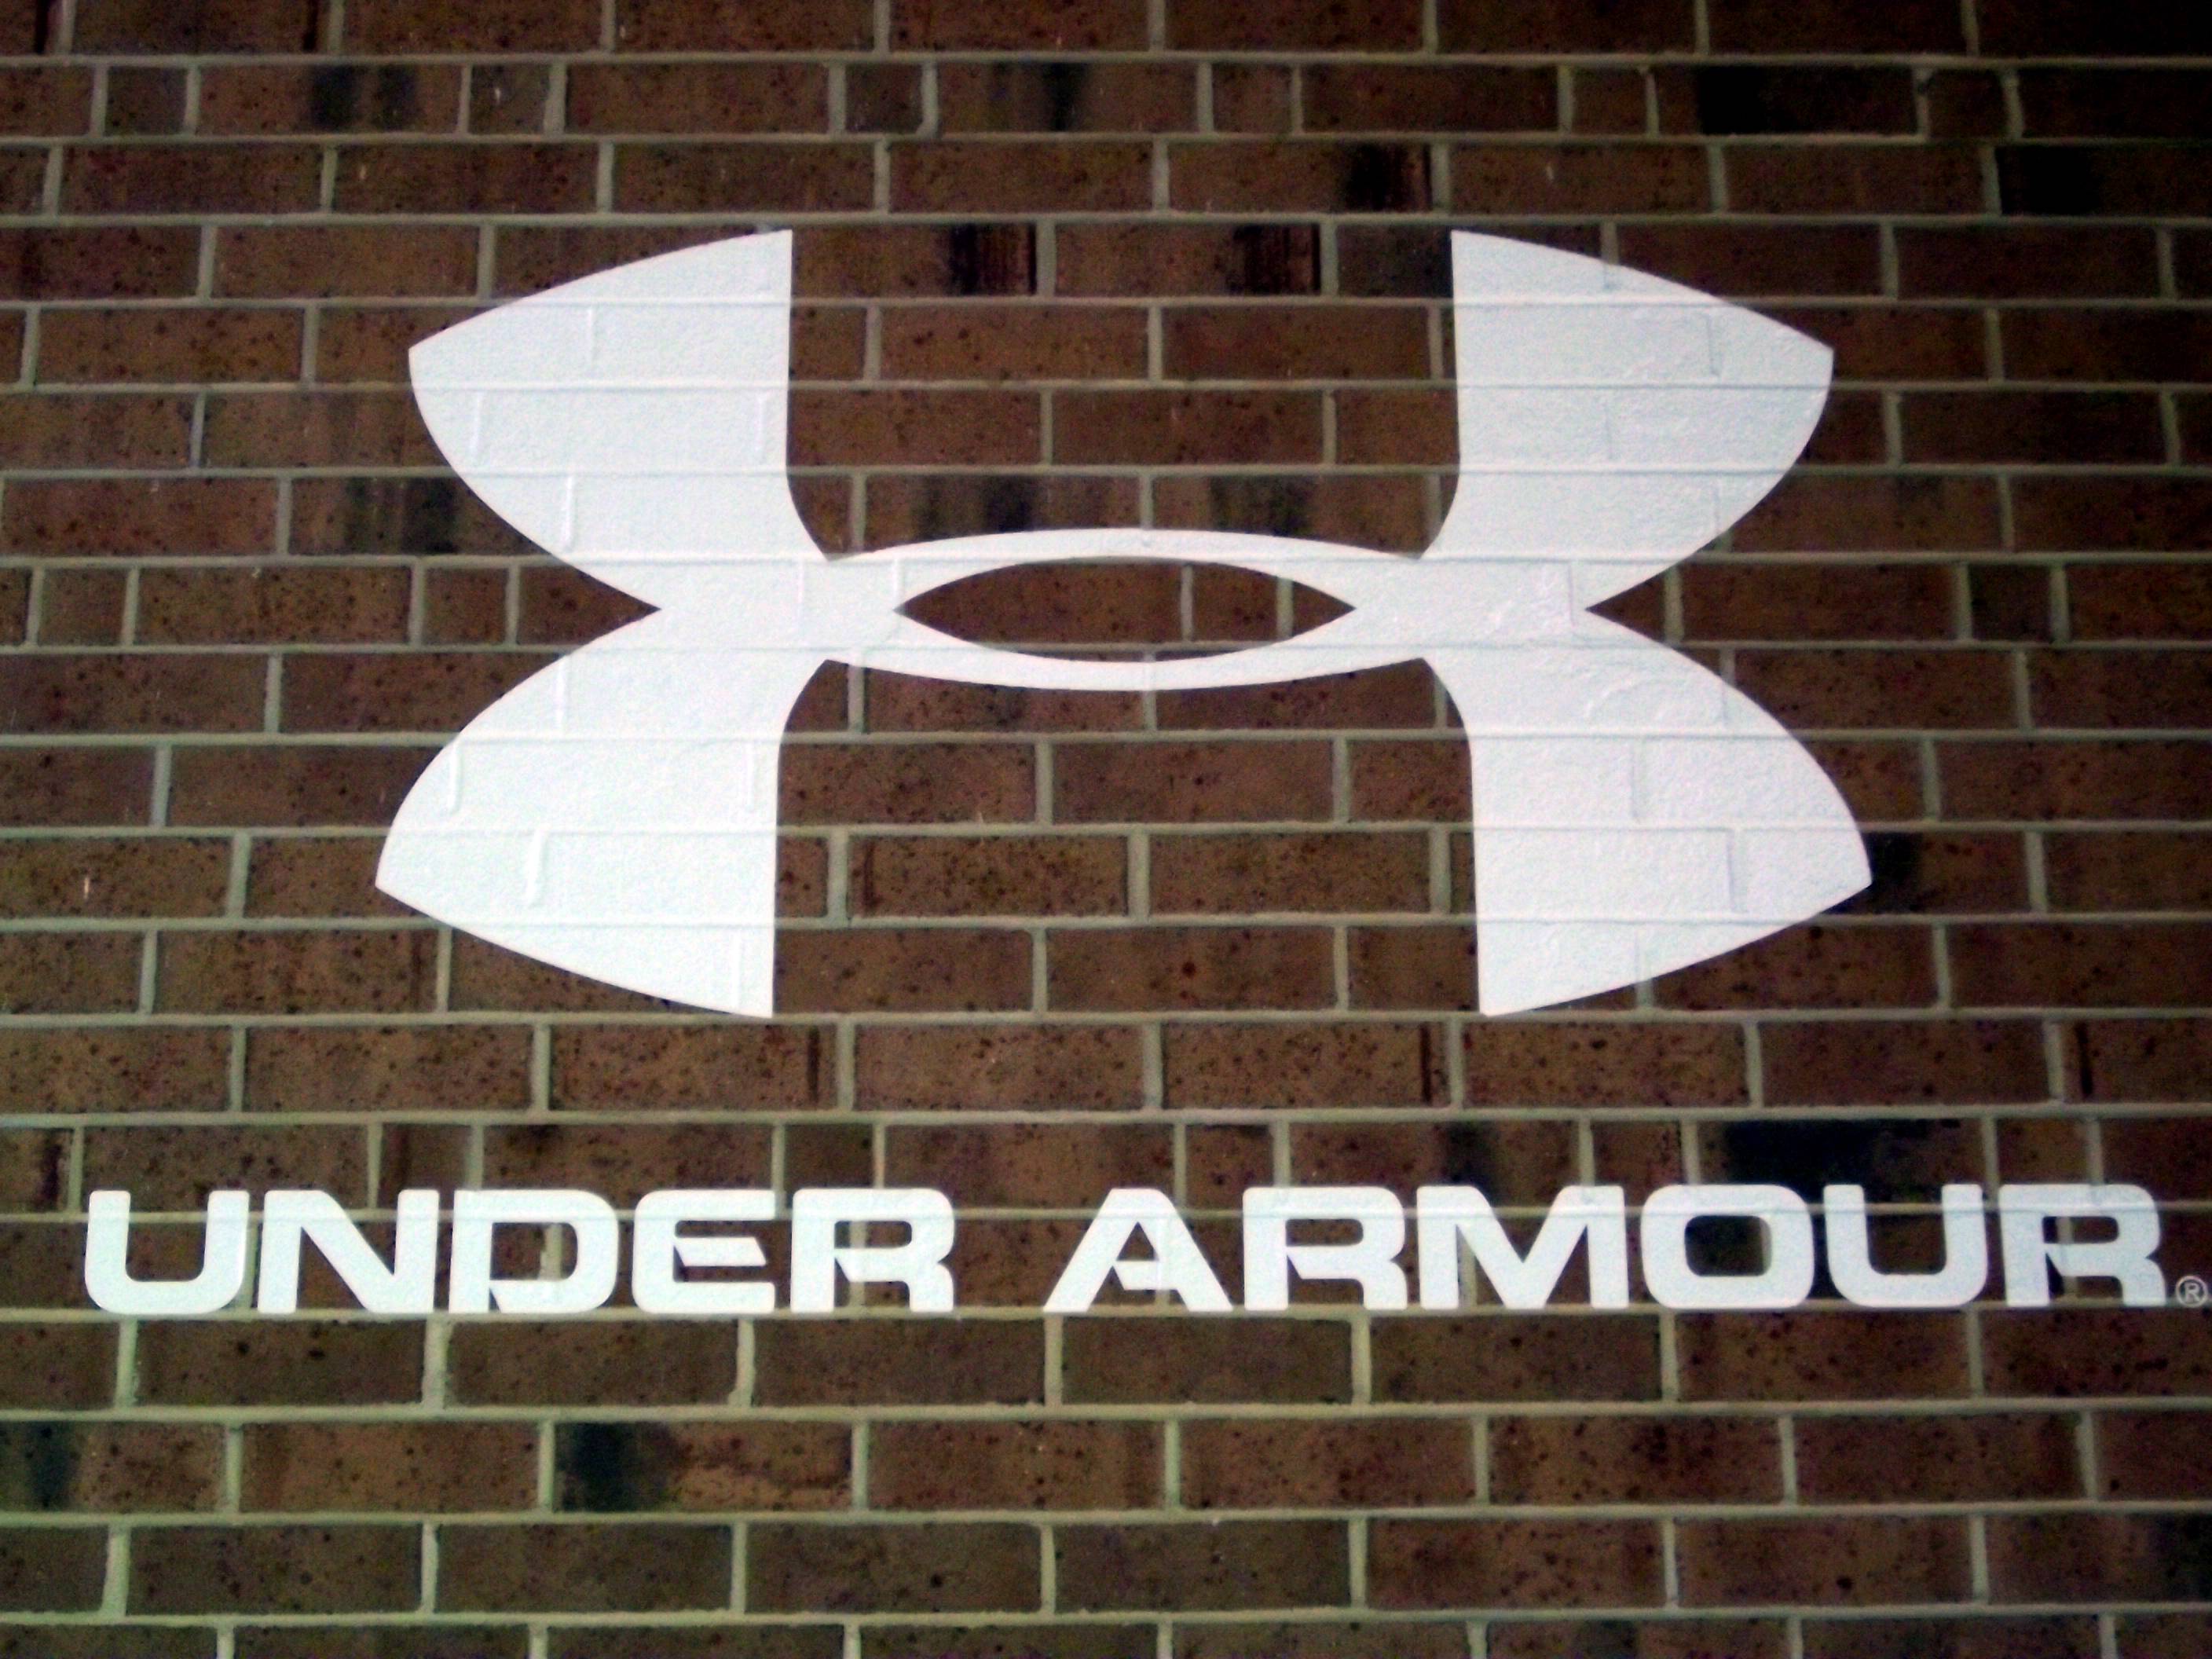 under armour background 6. Background Check All